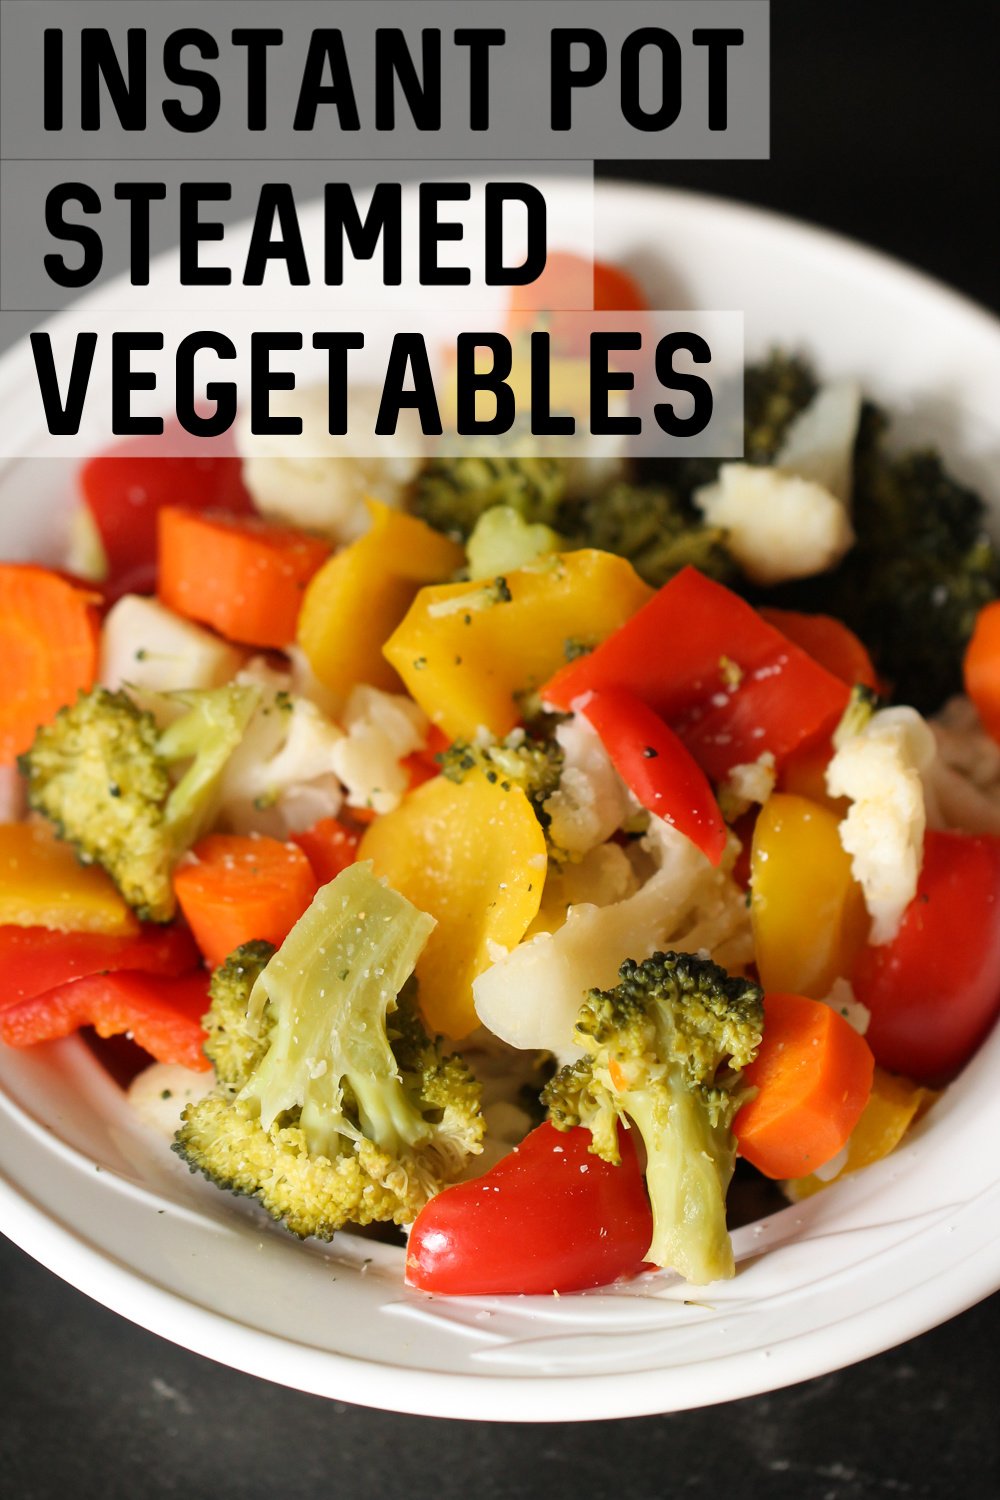 https://www.sixsistersstuff.com/wp-content/uploads/2020/04/Instant-Pot-Perfectly-Steamed-Vegetables-plated-on-six-sisters-stuff-words.jpg